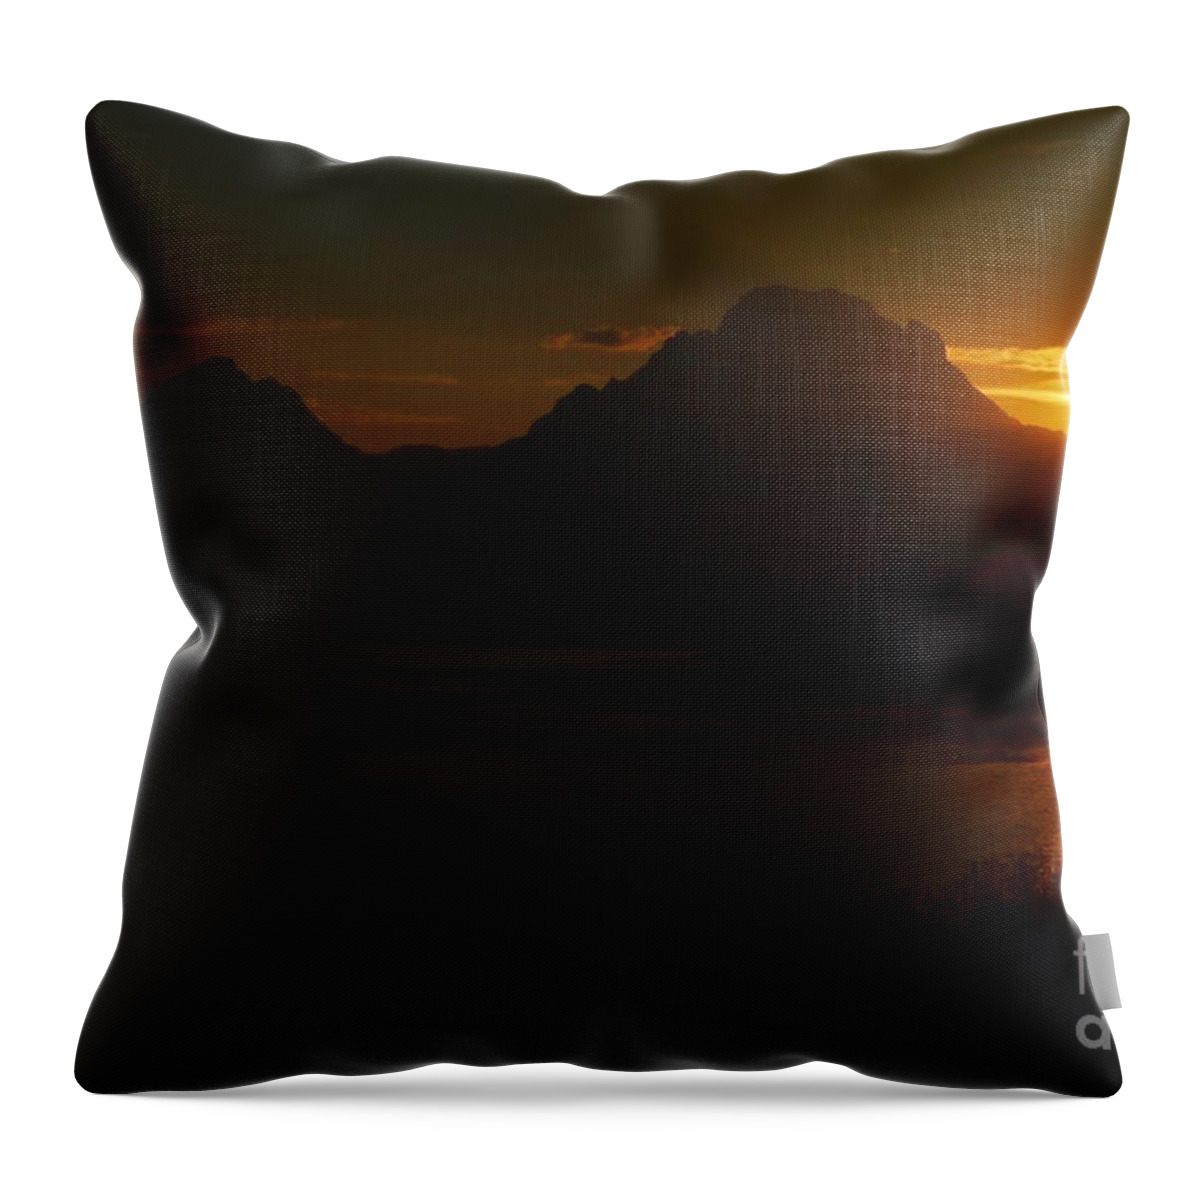 Sunset Throw Pillow featuring the photograph Moran Sunset by Deanna Cagle